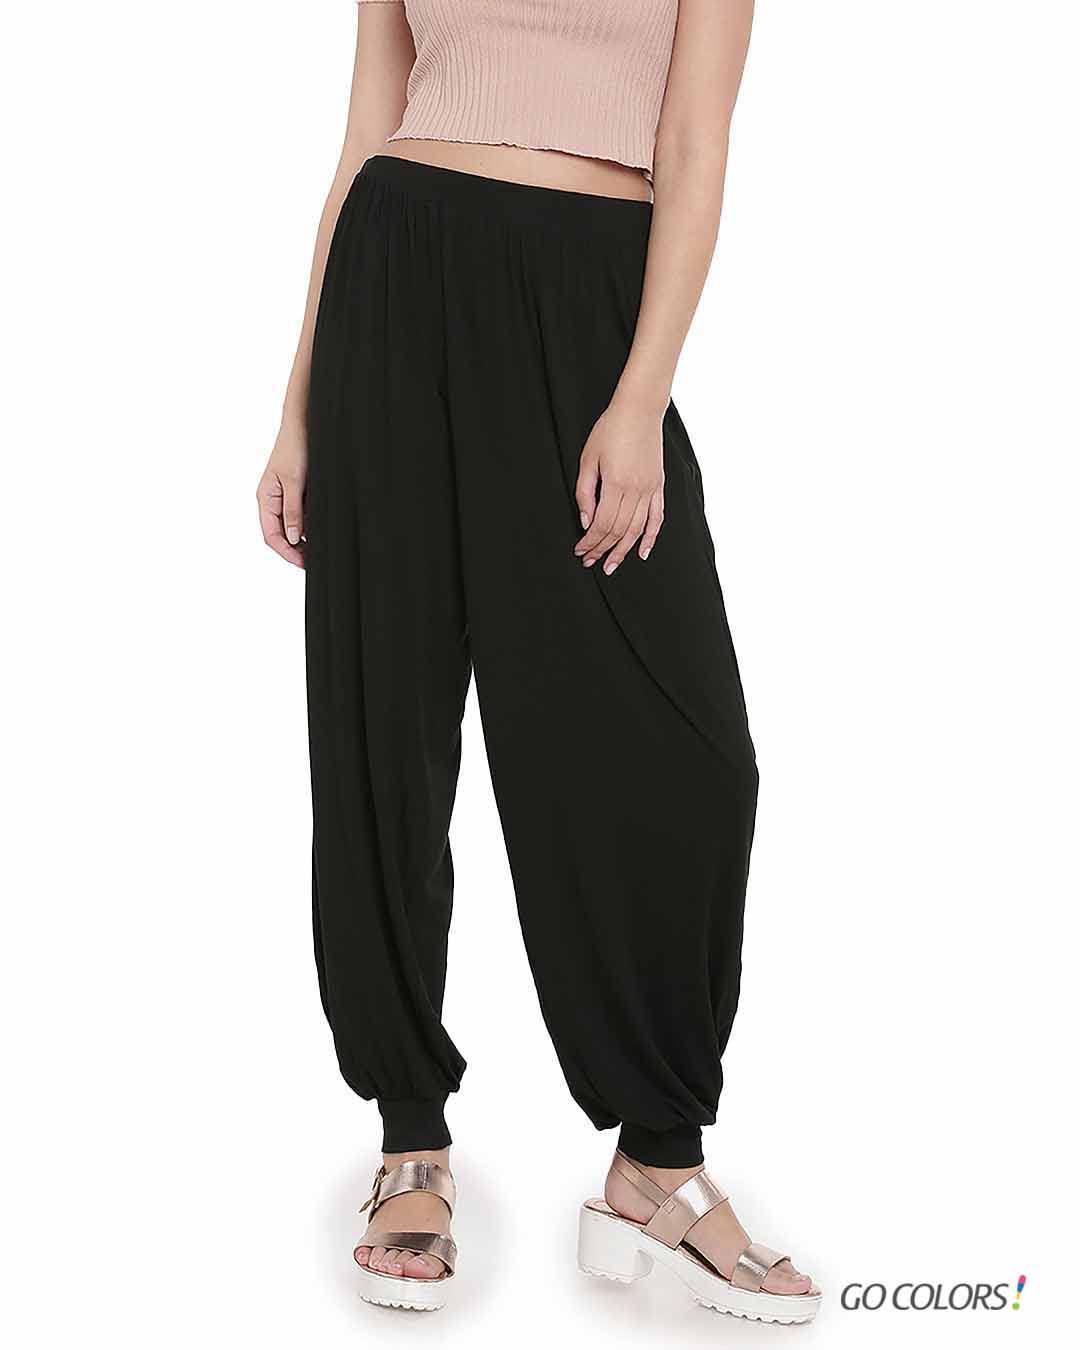 Black Cotton Rayon Dhoti Harem Pants for Girls  Women  Zubix  Clothing  Accessories and Home Furnishing Shop Online